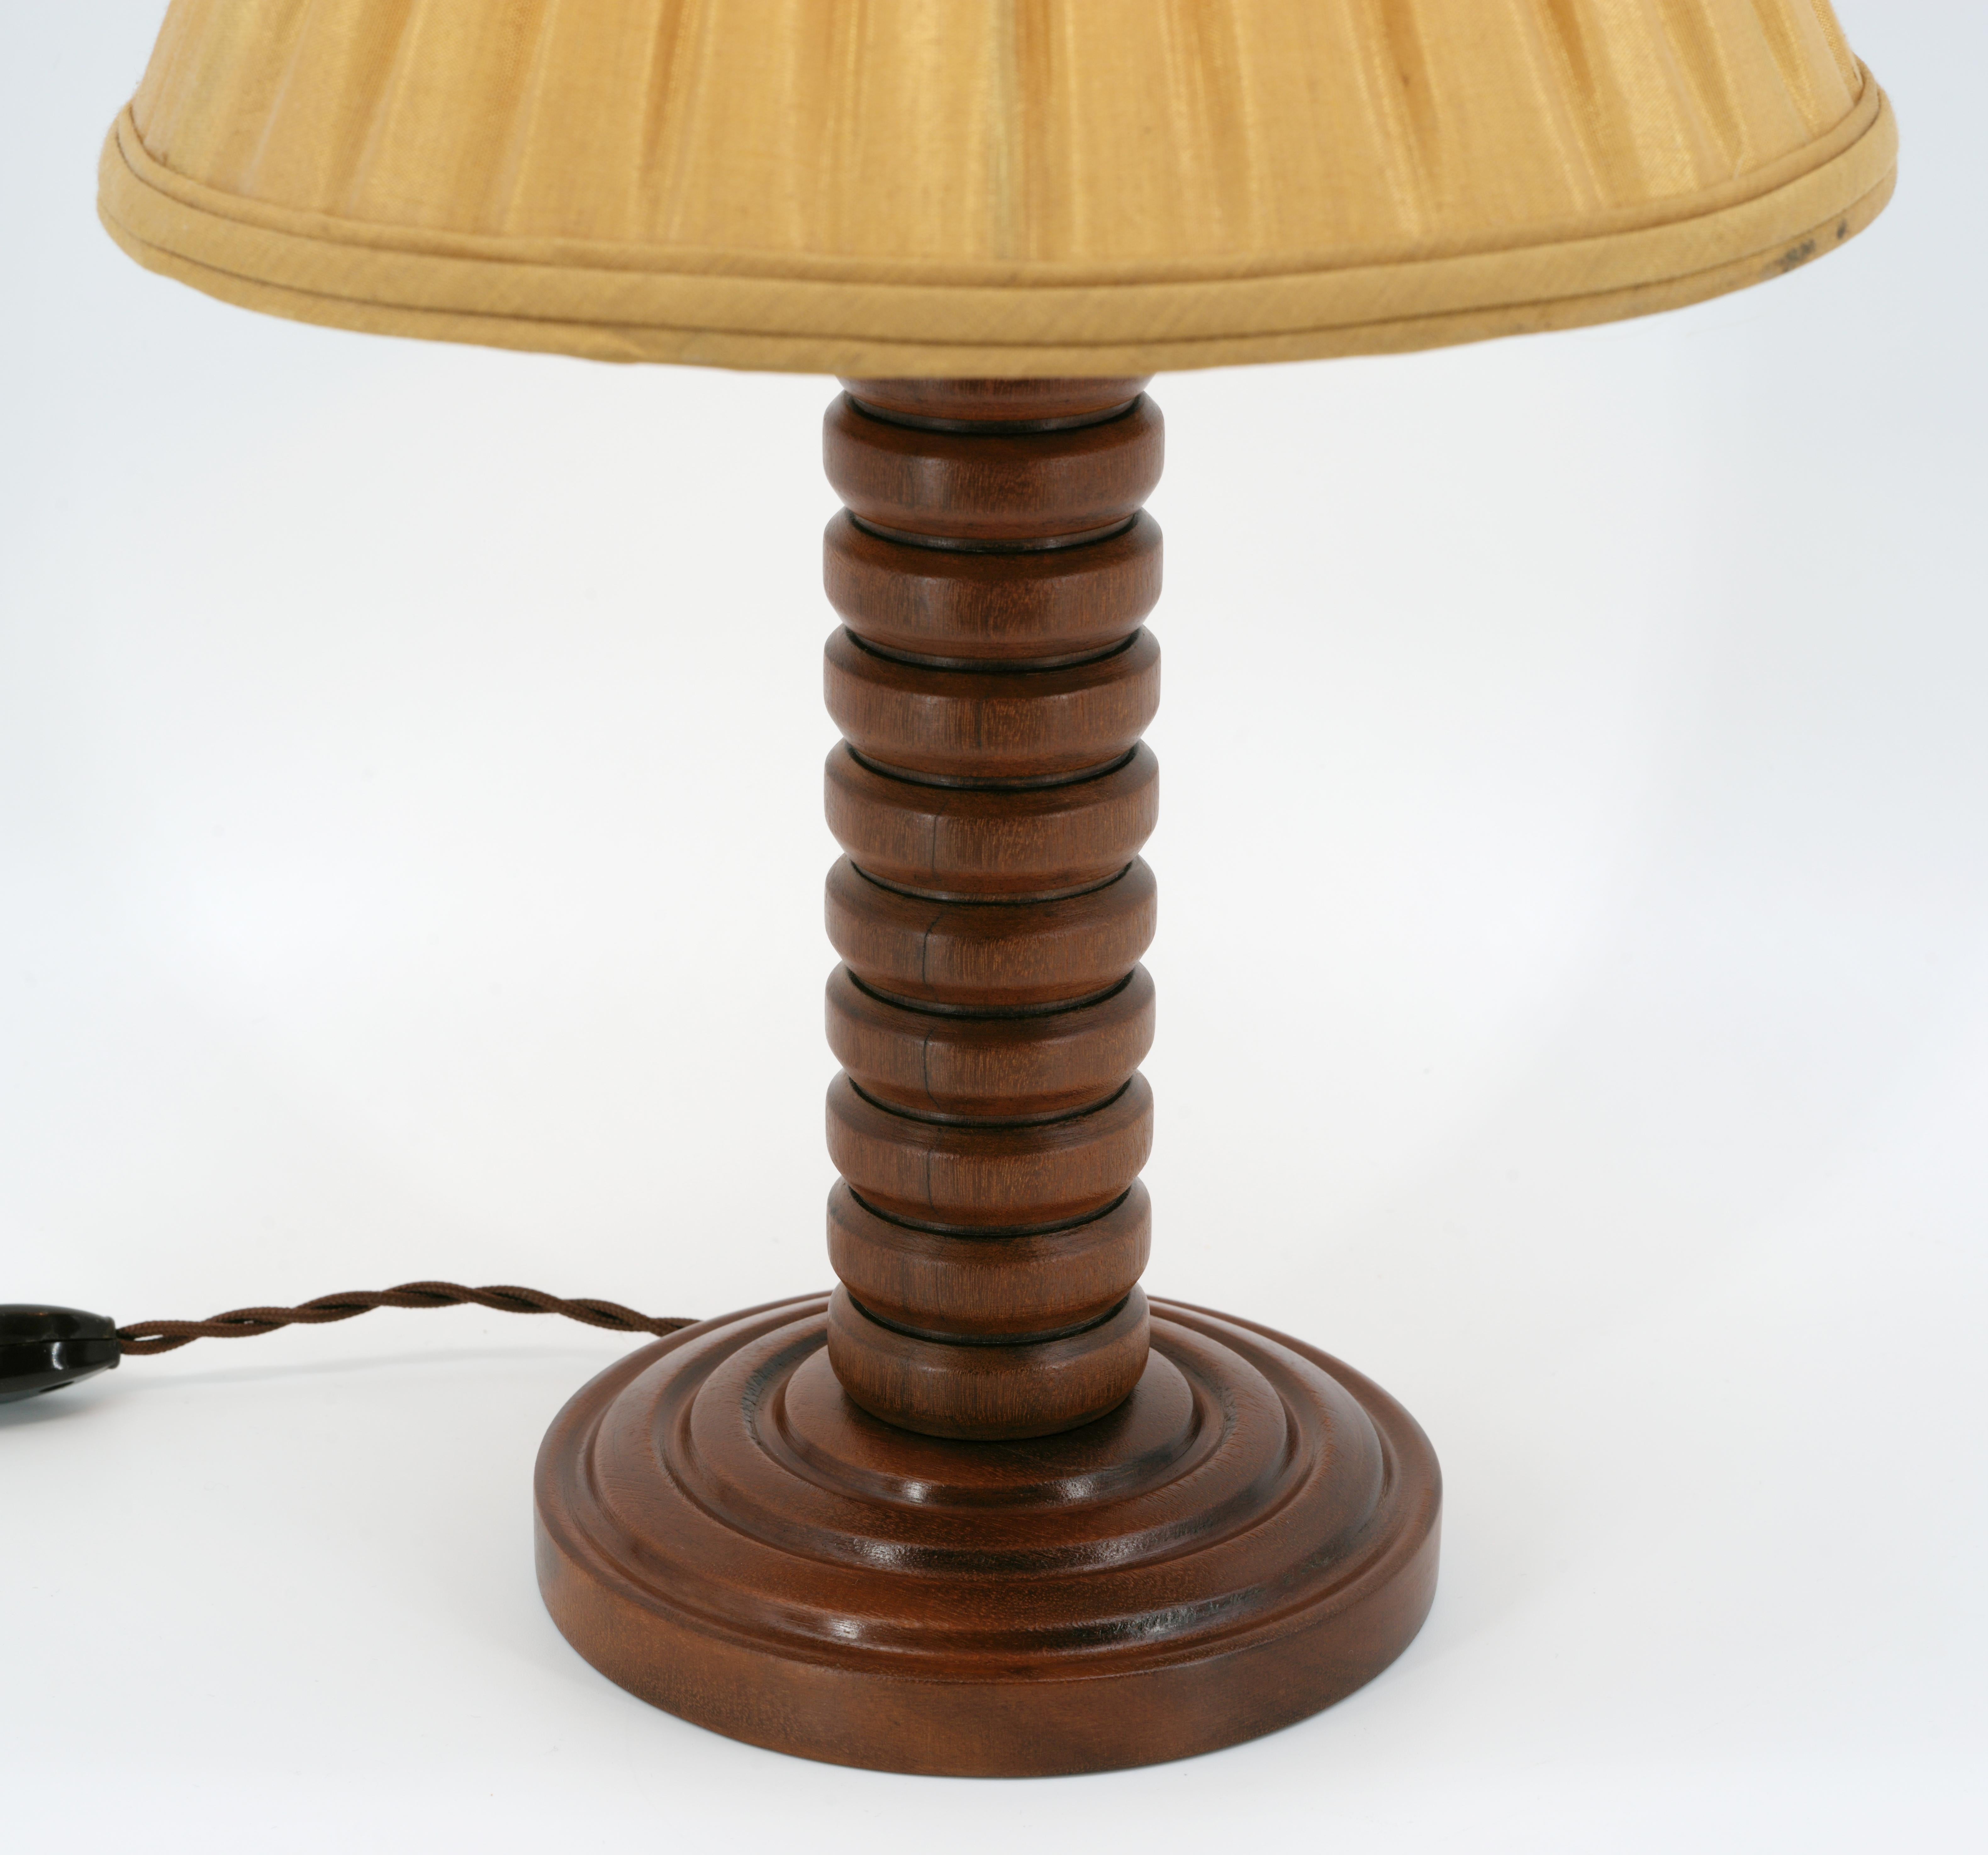 Fabric French Art Deco Wooden Table Lamp by Bouchard, 1930s For Sale